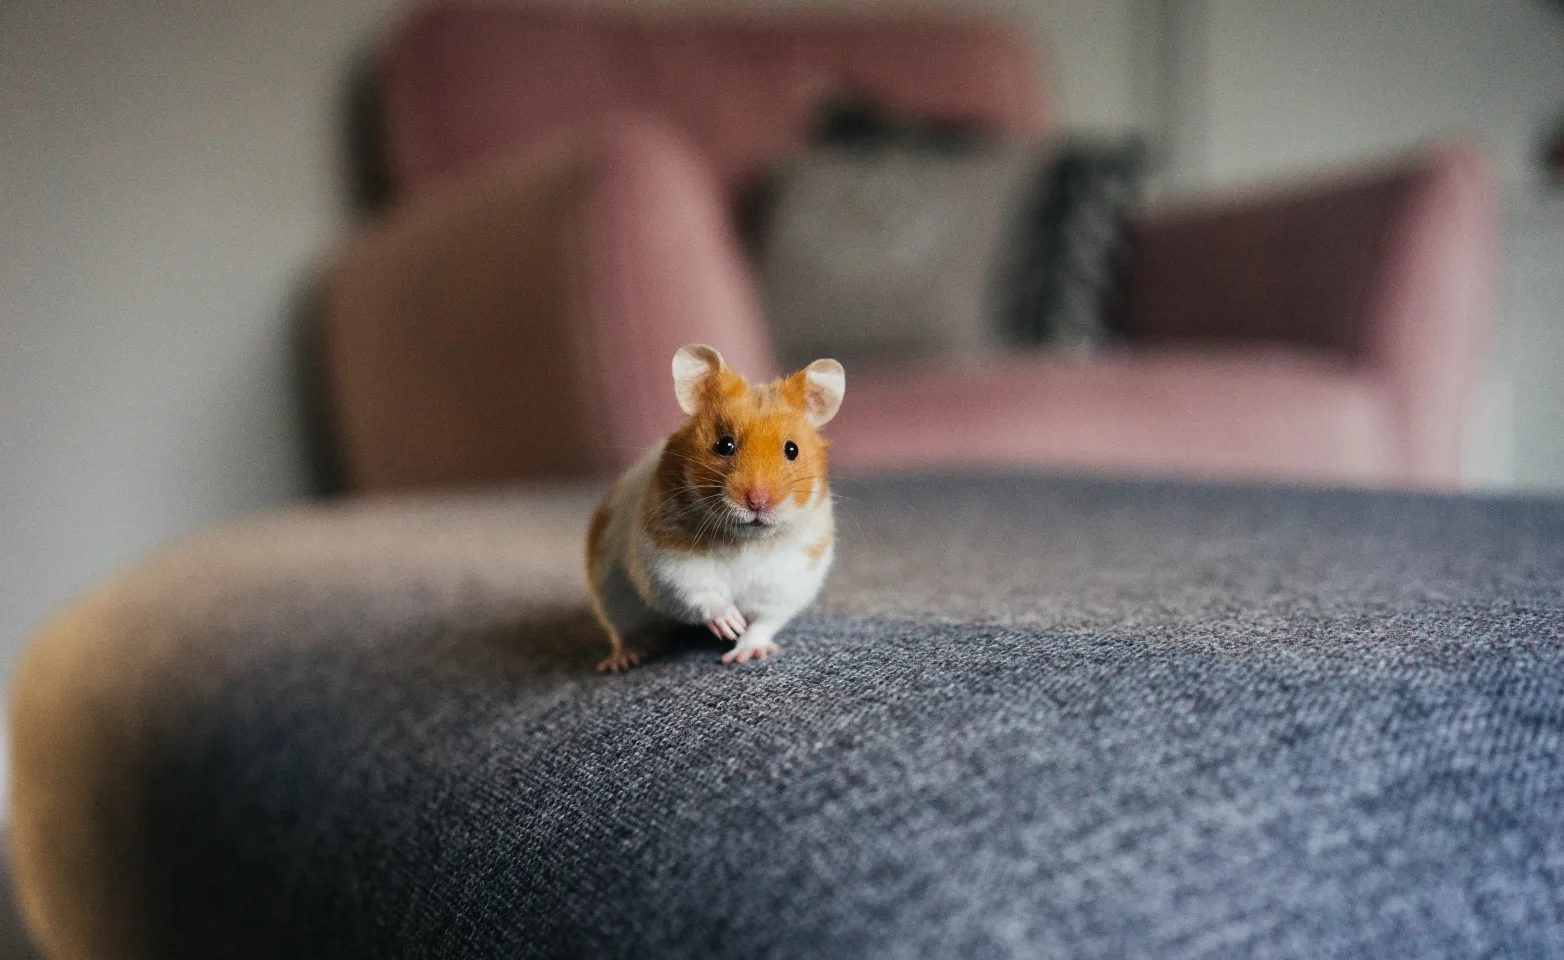 Tiny hamster sitting on a couch